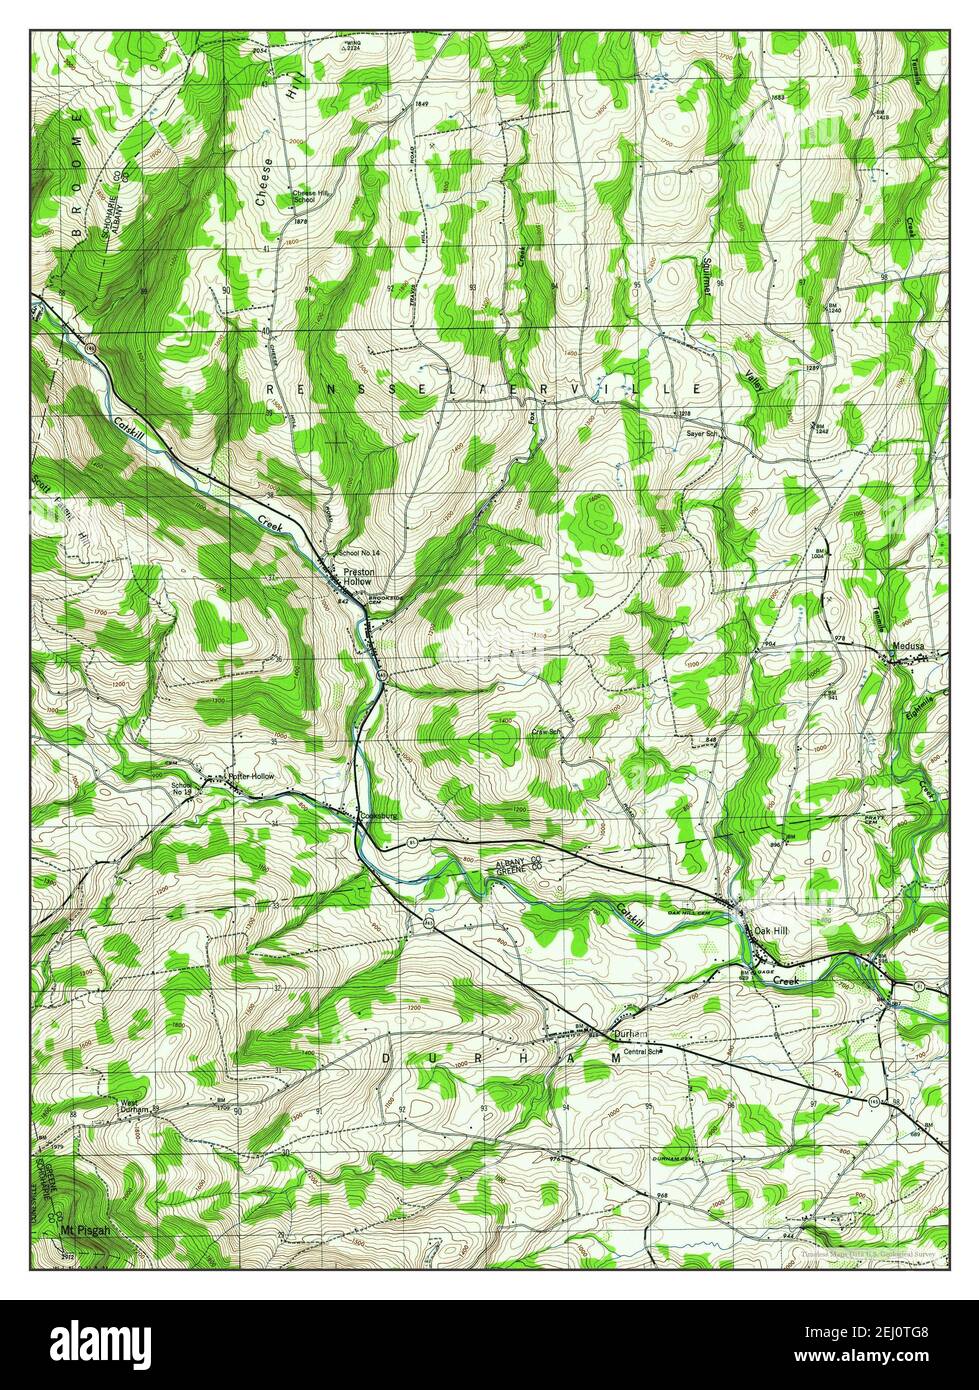 Durham, New York, map 1946, 1:24000, United States of America by Timeless Maps, data U.S. Geological Survey Stock Photo